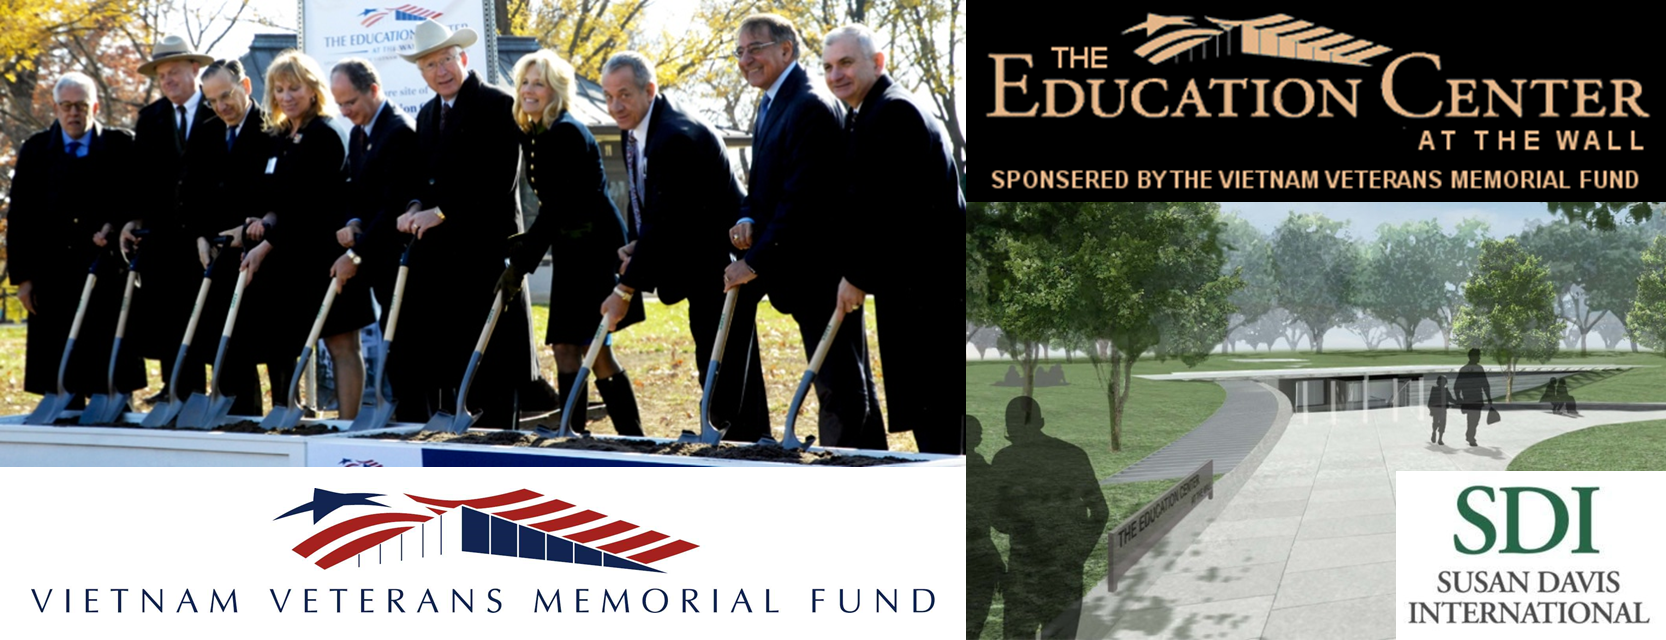  Ceremonial Groundbreaking for The Education Center at The Wall- Logo